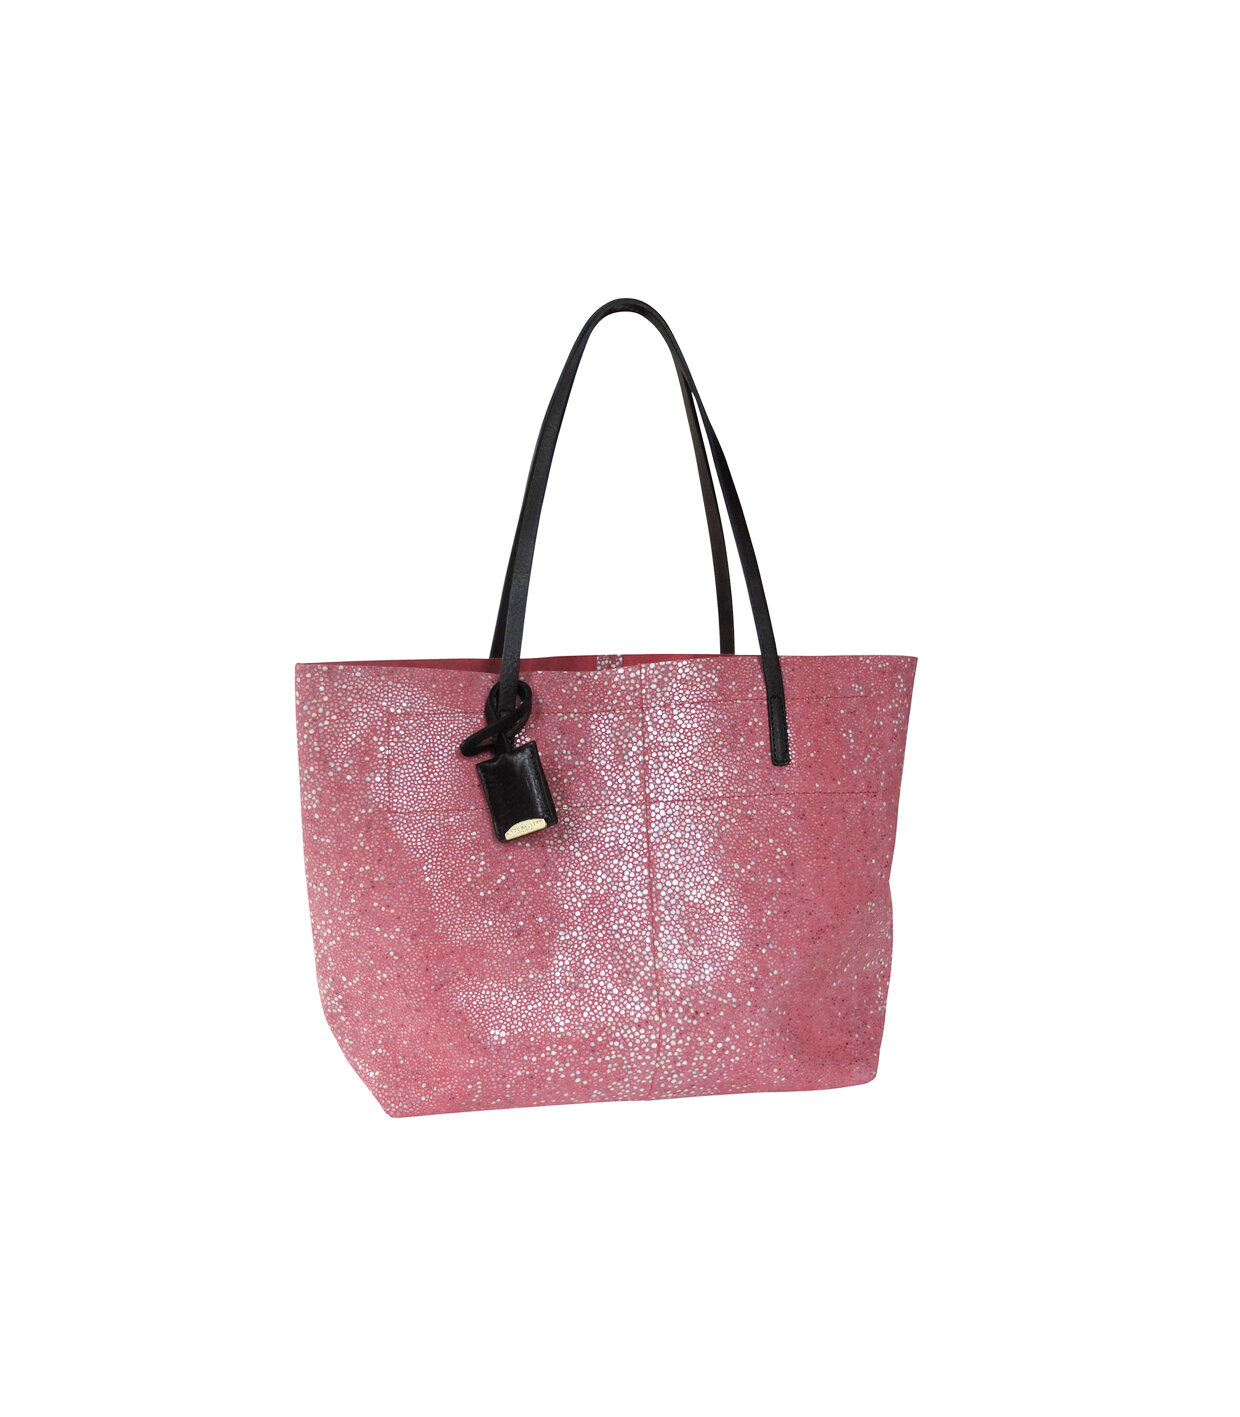 GOUVERNEUR S - GALUCHAT - PRINTED SUEDE - HIBISCUS — Linde Gallery St-Barth